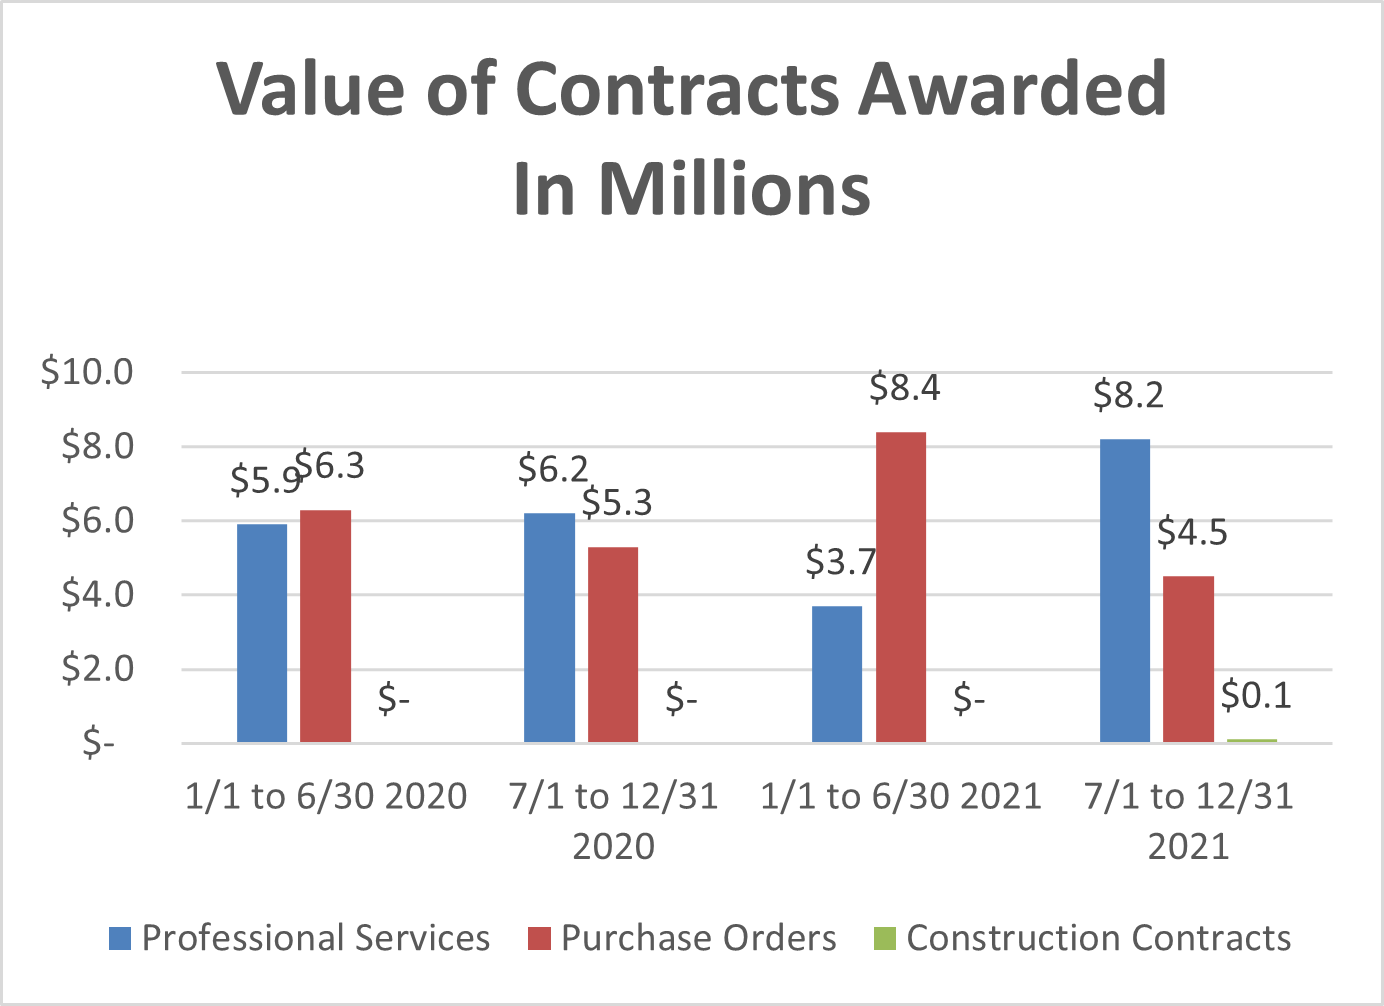 Value of Contracts Awarded in Millions